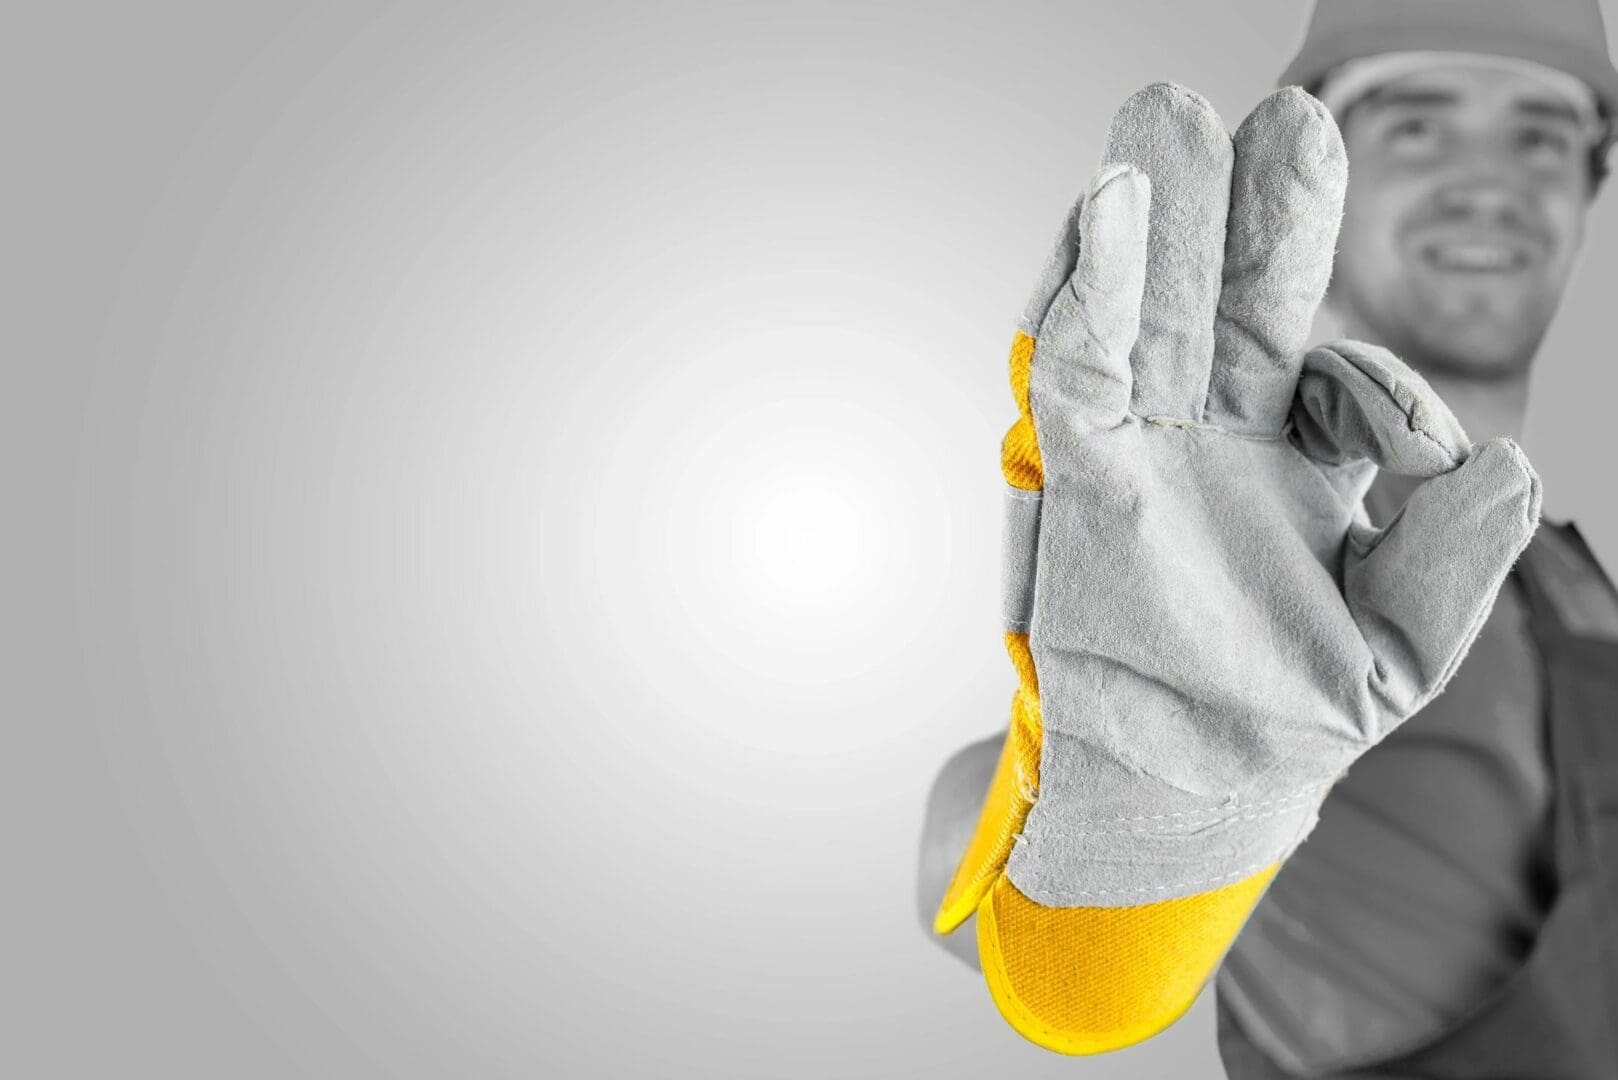 A person wearing gloves holding something in their hand.